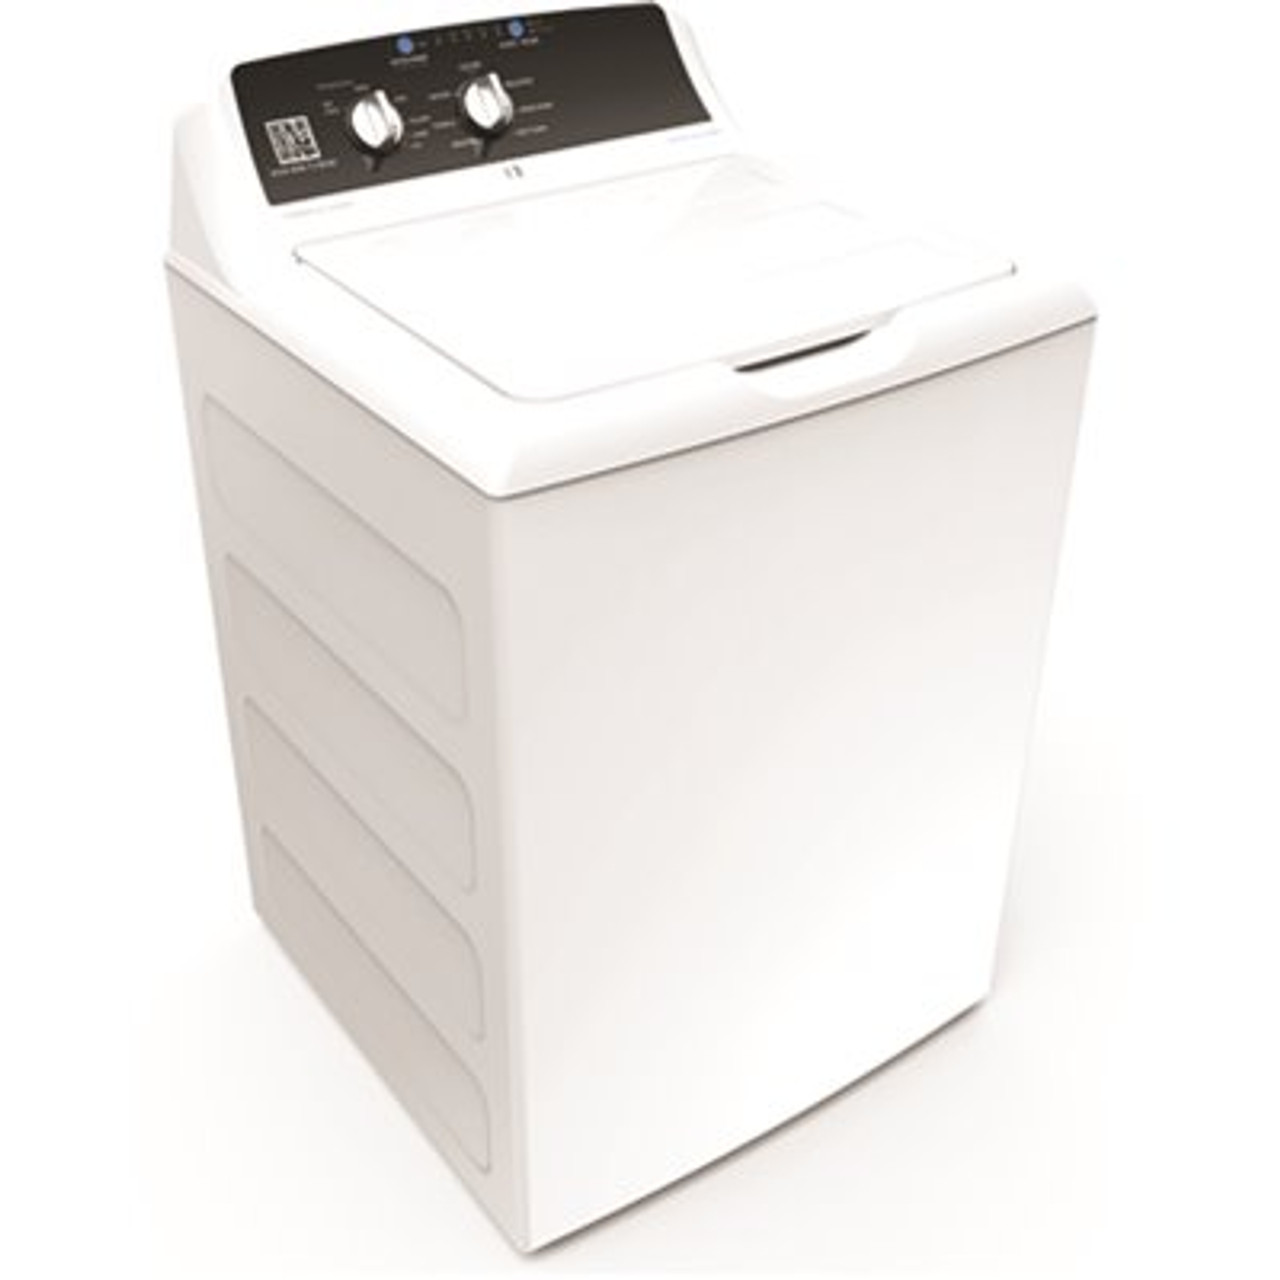 GE 4.2 cu. ft. White Commercial Top Load Washer with Stainless Steel Basket